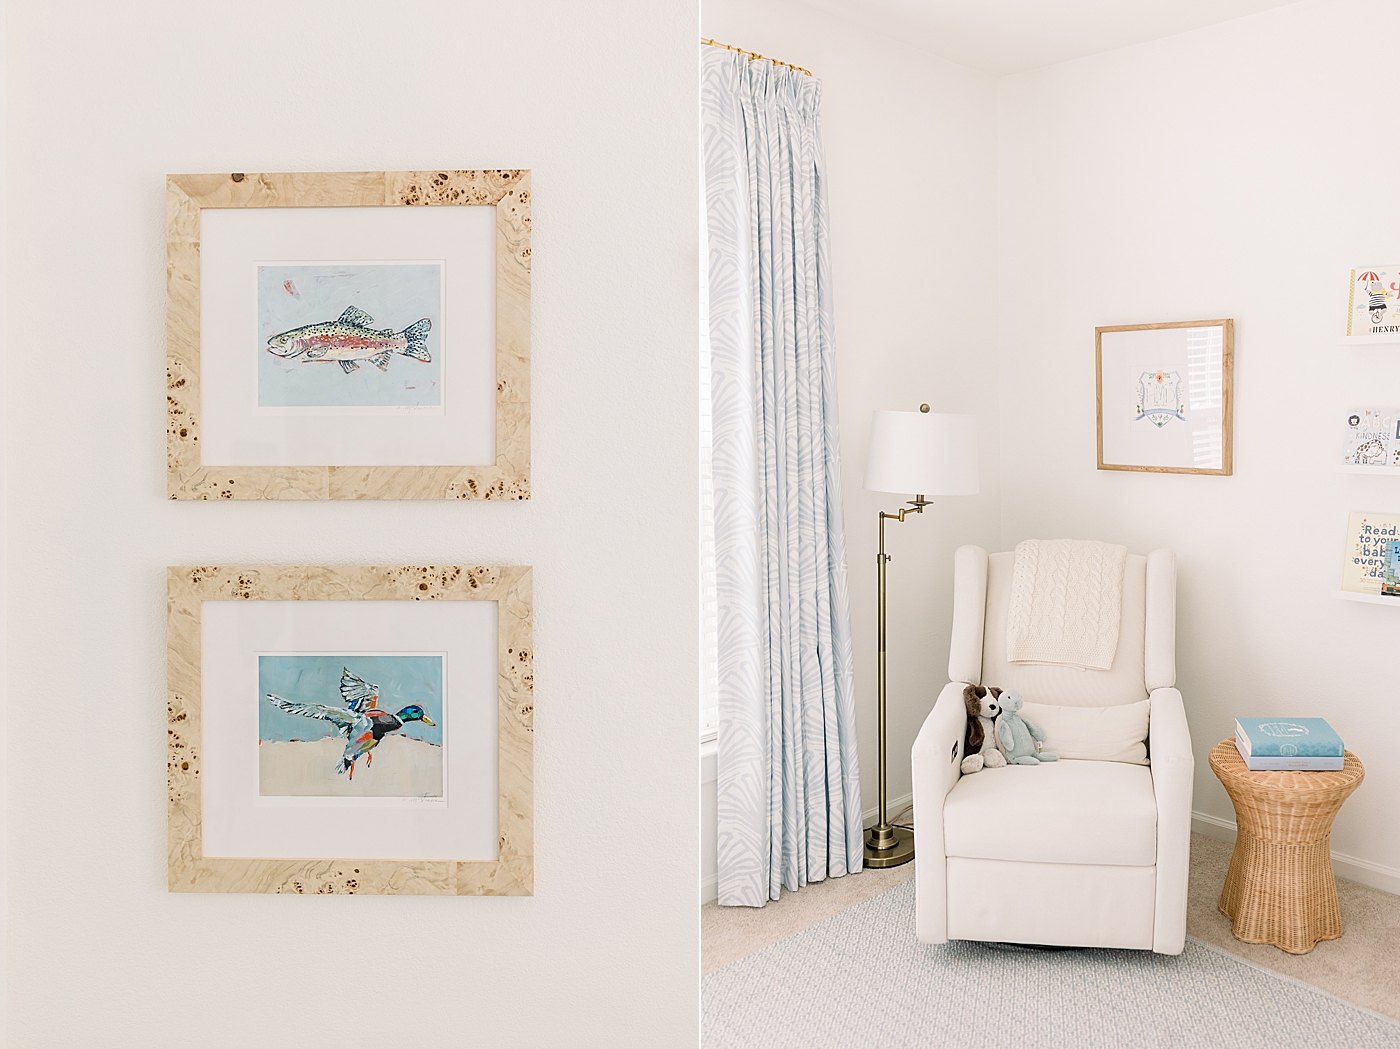 Double image of baby room details. One image of artwork and the other of a white rocking chair in the corner with a table and lamp | Image by Caitlyn Motycka Photography